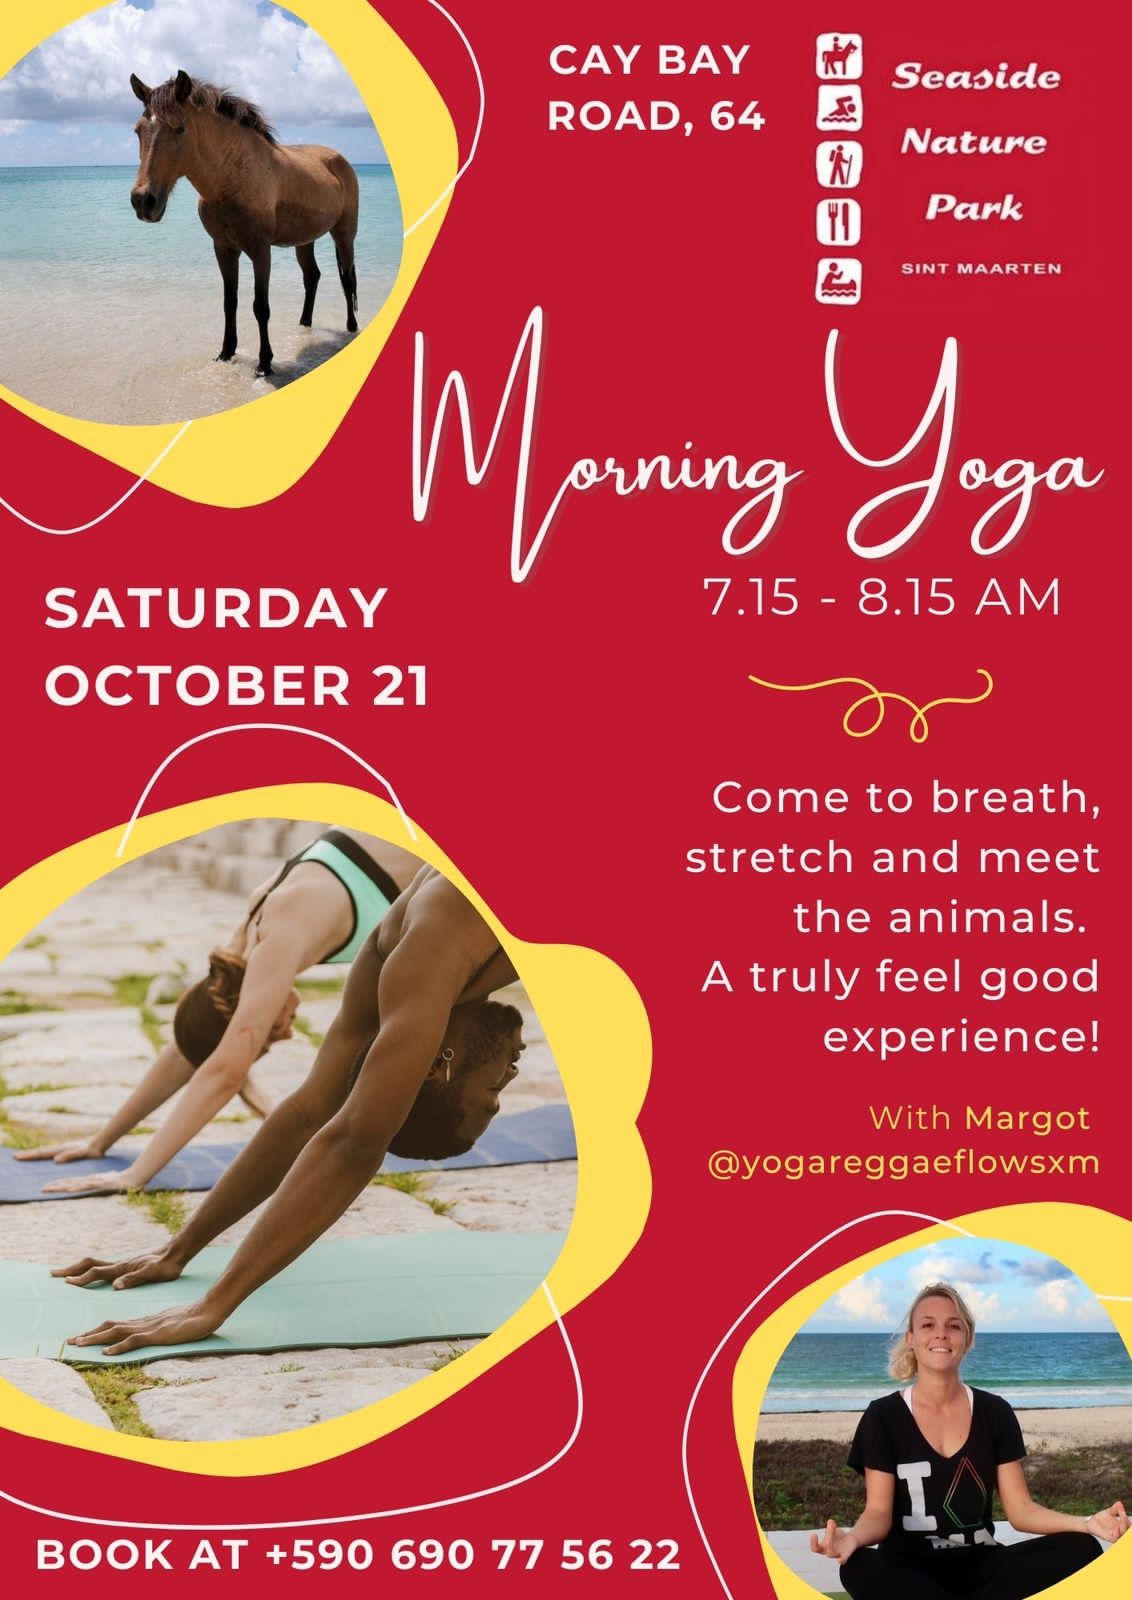 Red colored flyer with information about the Morning yoga at Seaside Nature Park Sint Maarten located near Cay Bay Beach, featuring pictures of people that do yoga and a horse